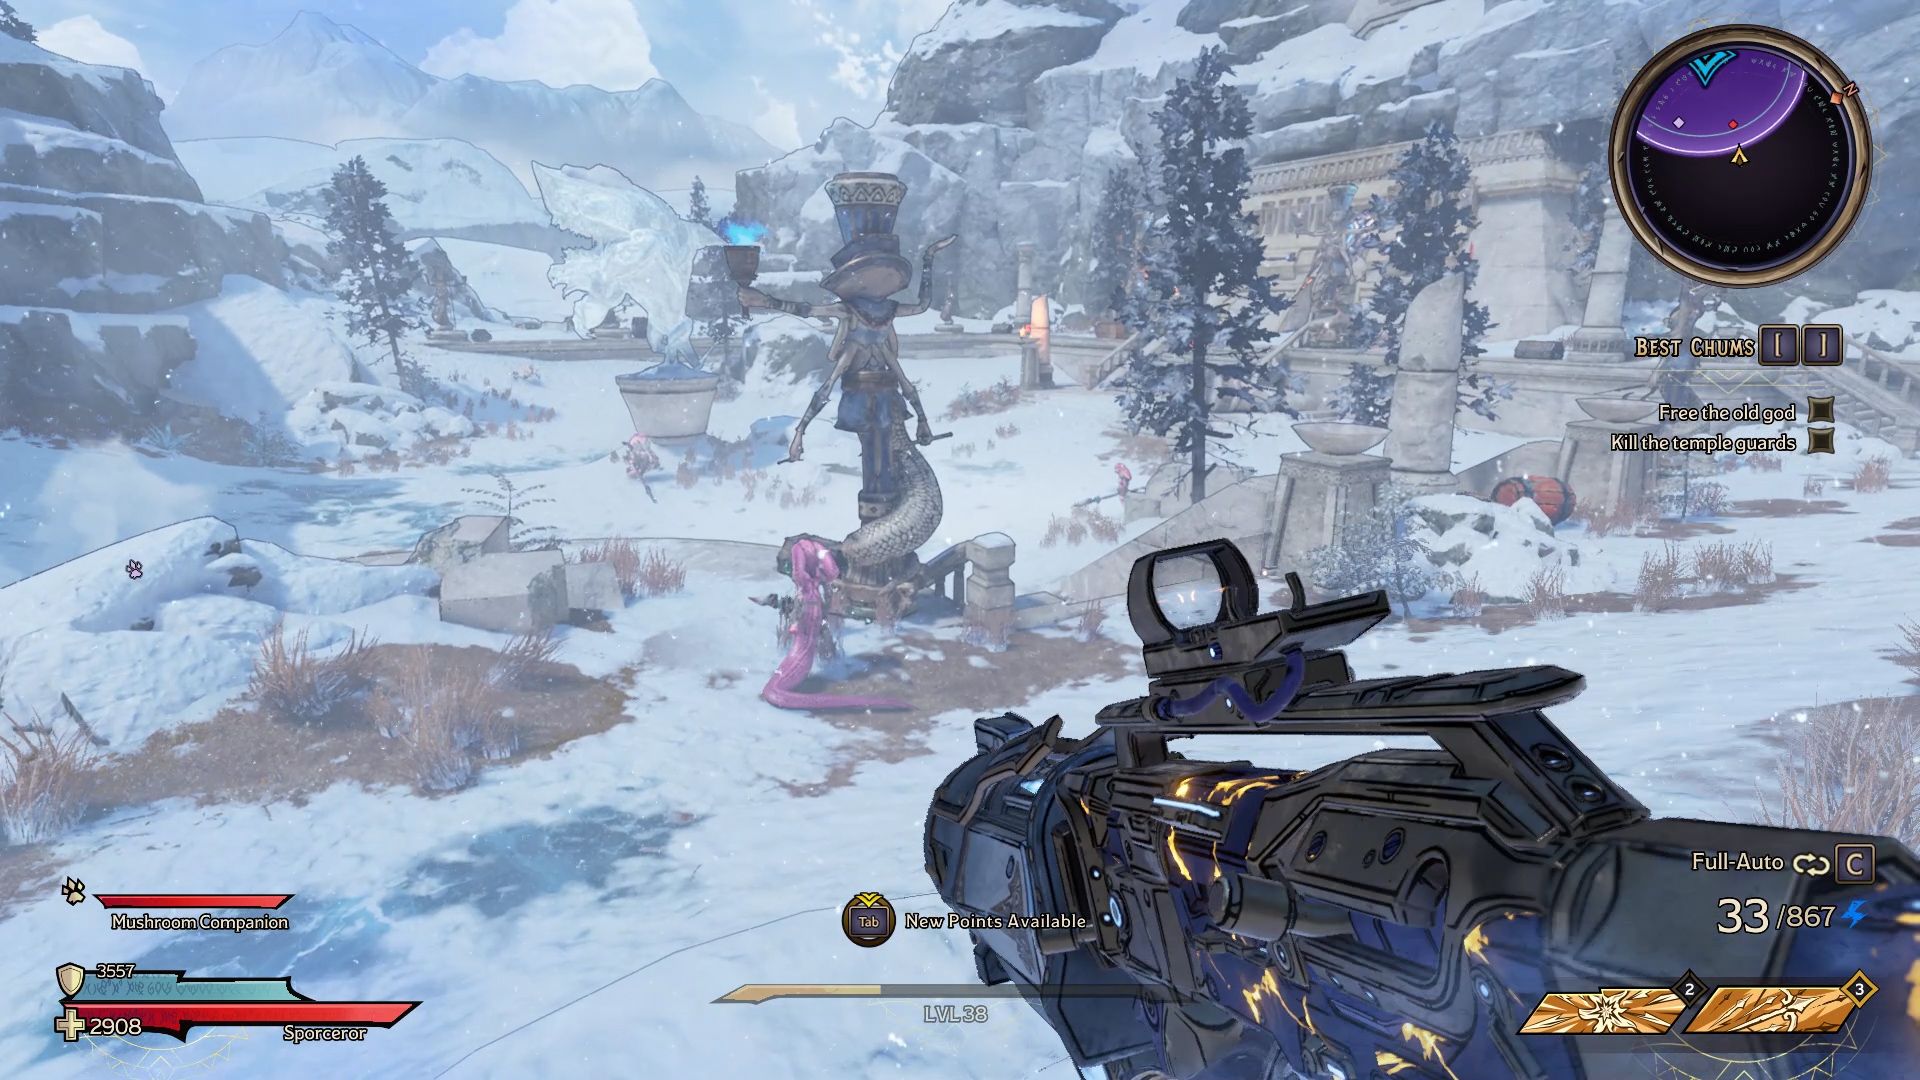 A player looks out on a snowy area filled with ruins and Coiled enemies